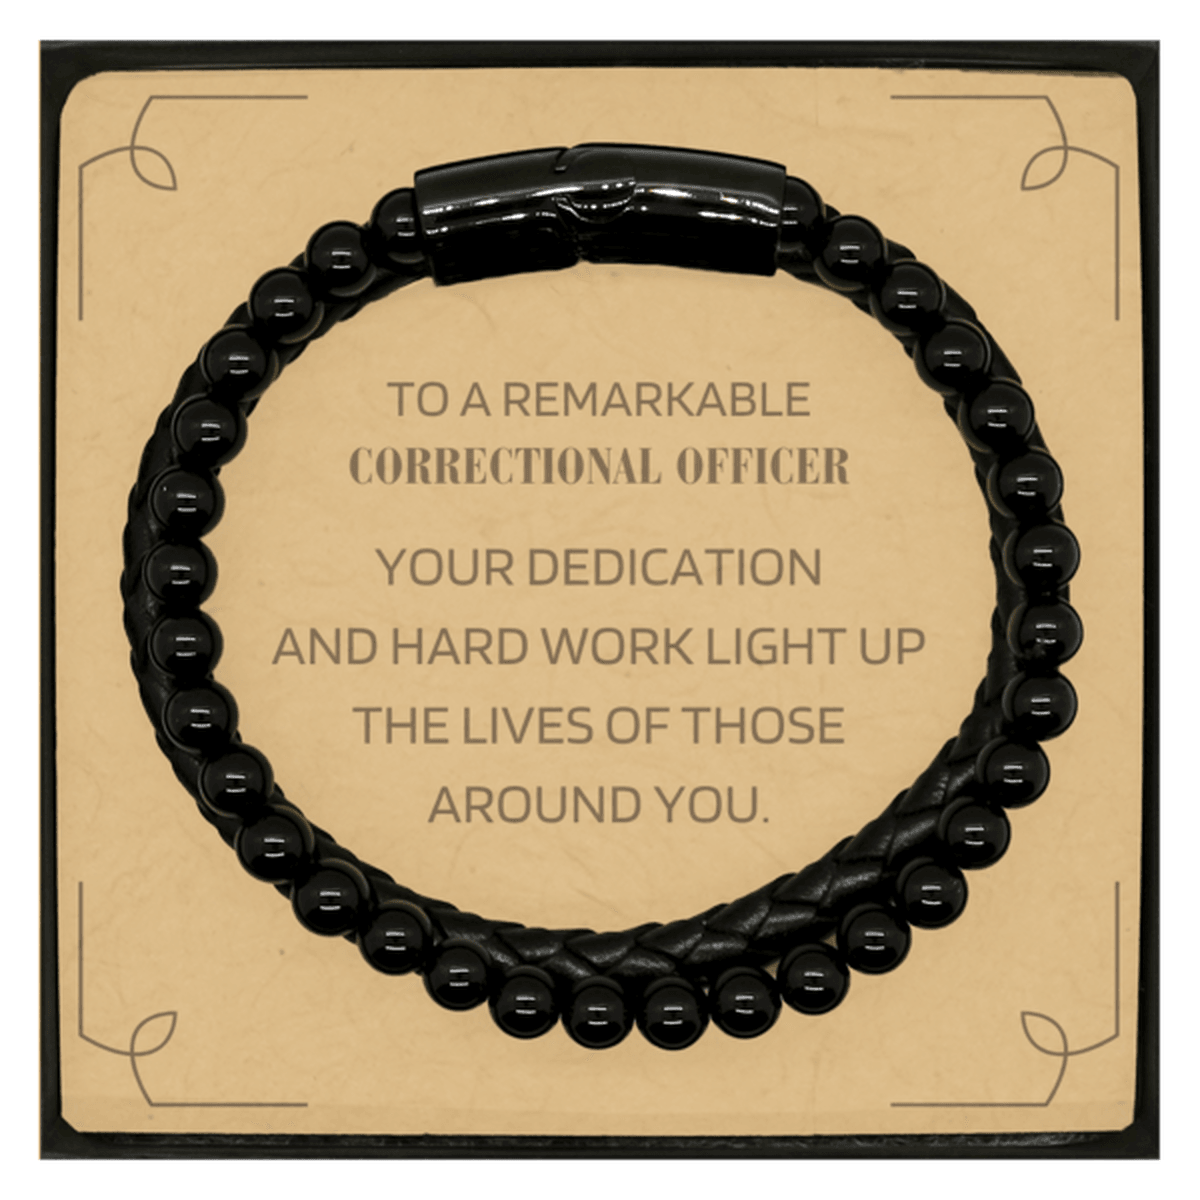 Remarkable Correctional Officer Gifts, Your dedication and hard work, Inspirational Birthday Christmas Unique Stone Leather Bracelets For Correctional Officer, Coworkers, Men, Women, Friends - Mallard Moon Gift Shop